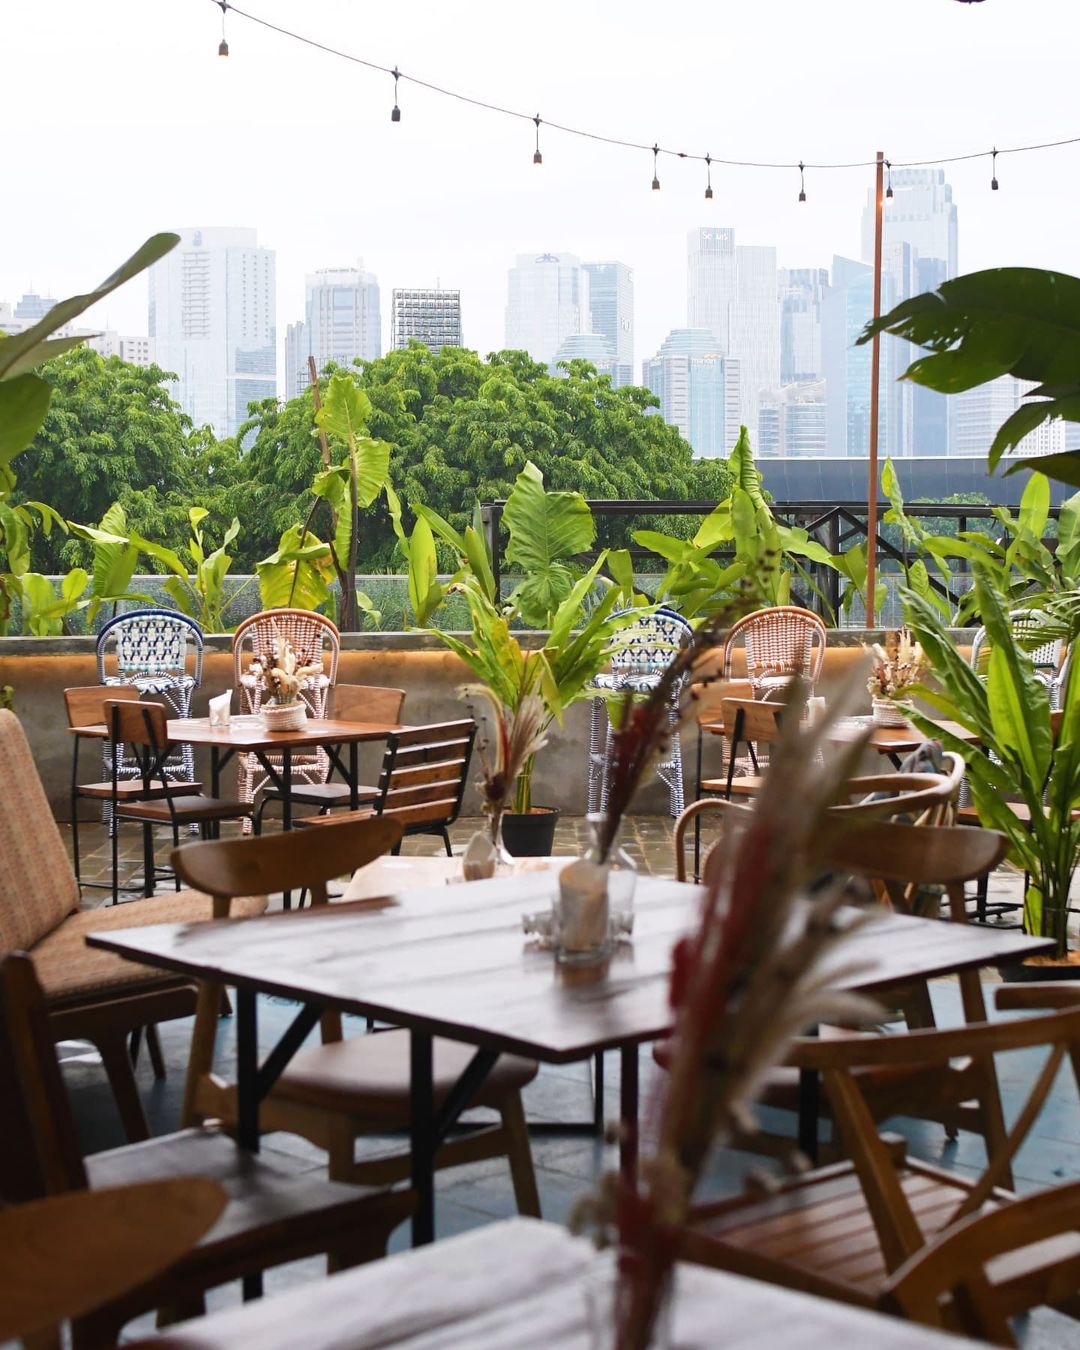 Cafe Rooftop Jakarta Lucy In The Sky Senayan Park Image From @lucyintheskyjakarta